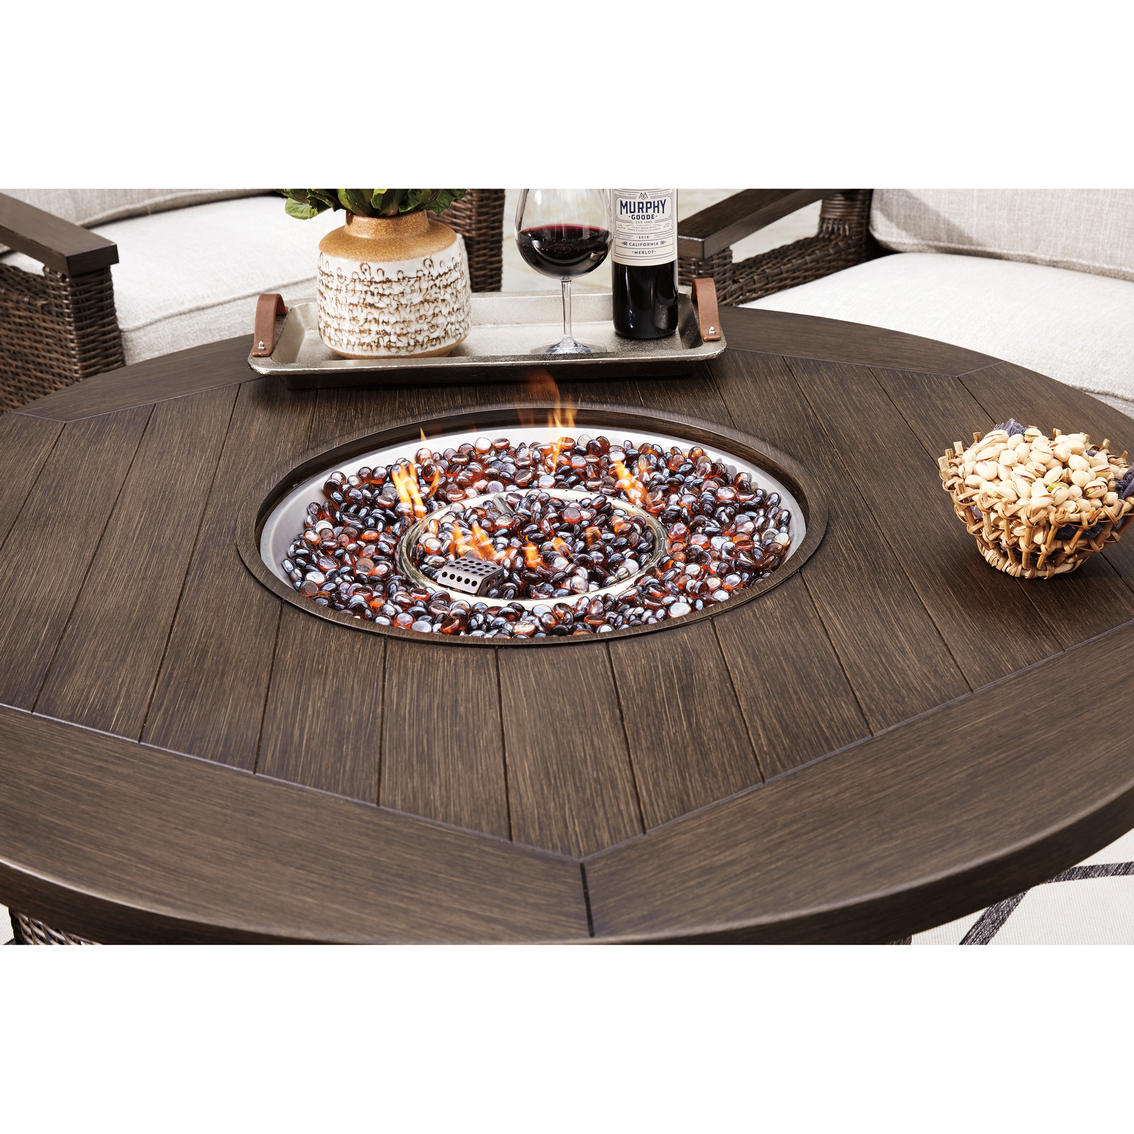 Signature Design by Ashley Grasson Lane Lounge Chairs, Loveseat, Firepit Table Set - Image 6 of 8